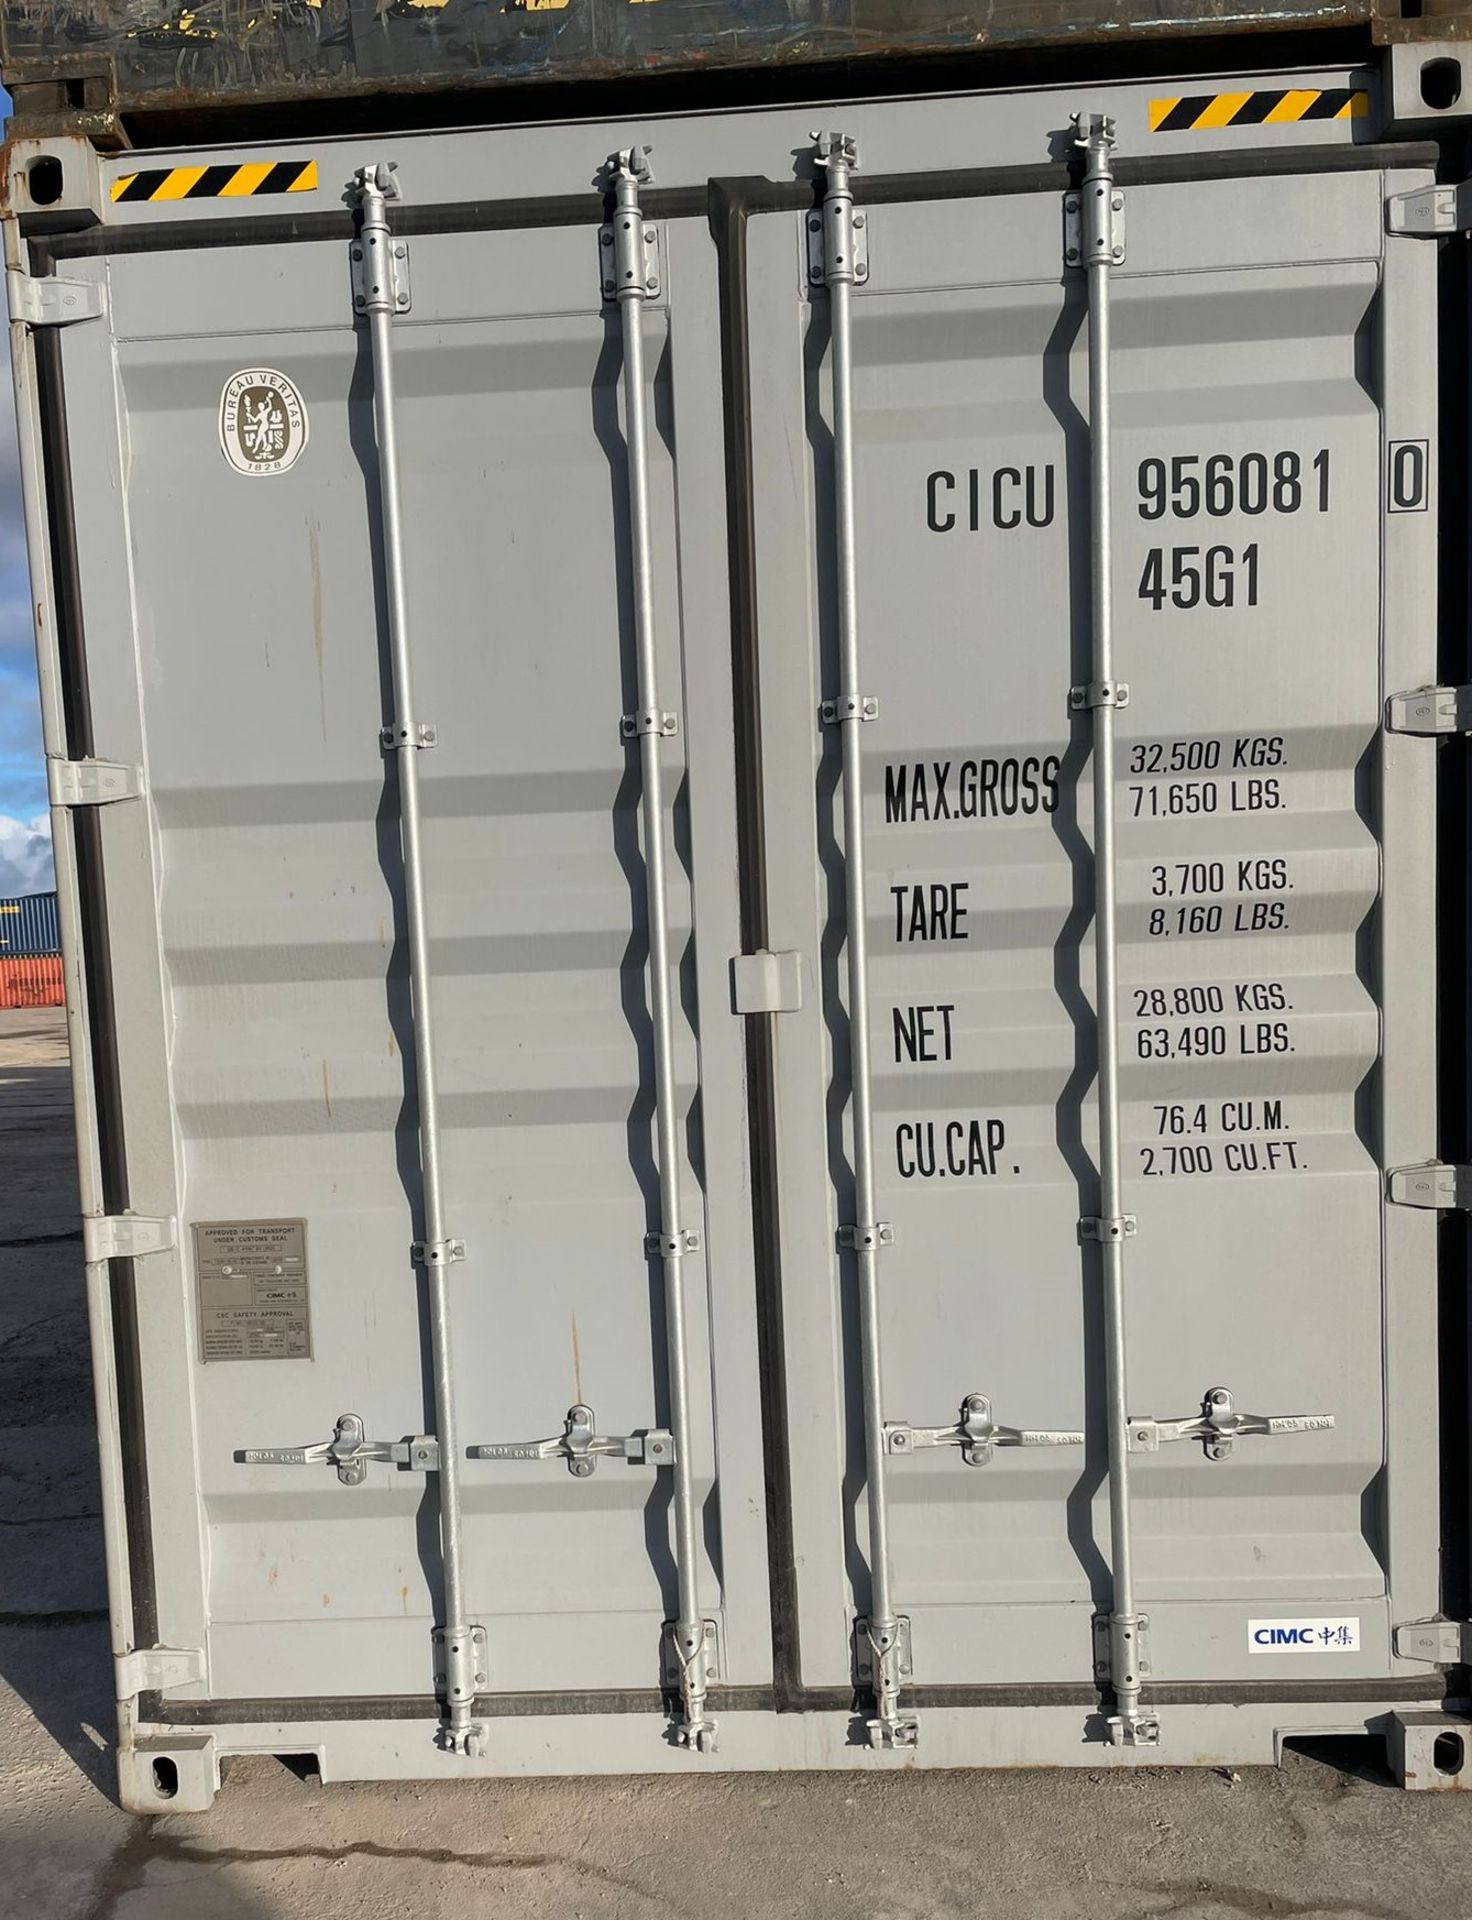 40ft HC Shipping Container - ref CICU9560810